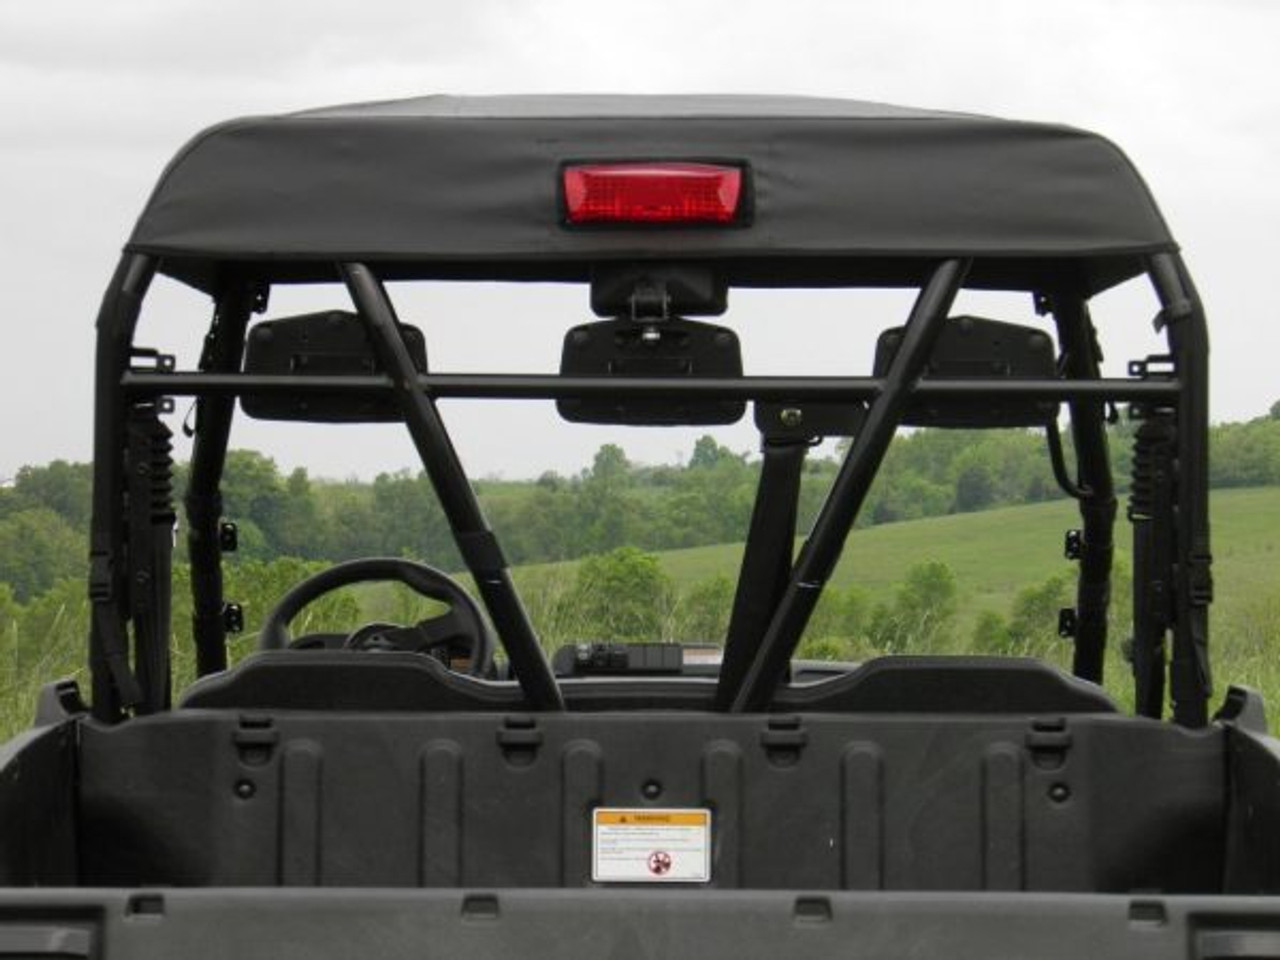 Soft top rear ide view